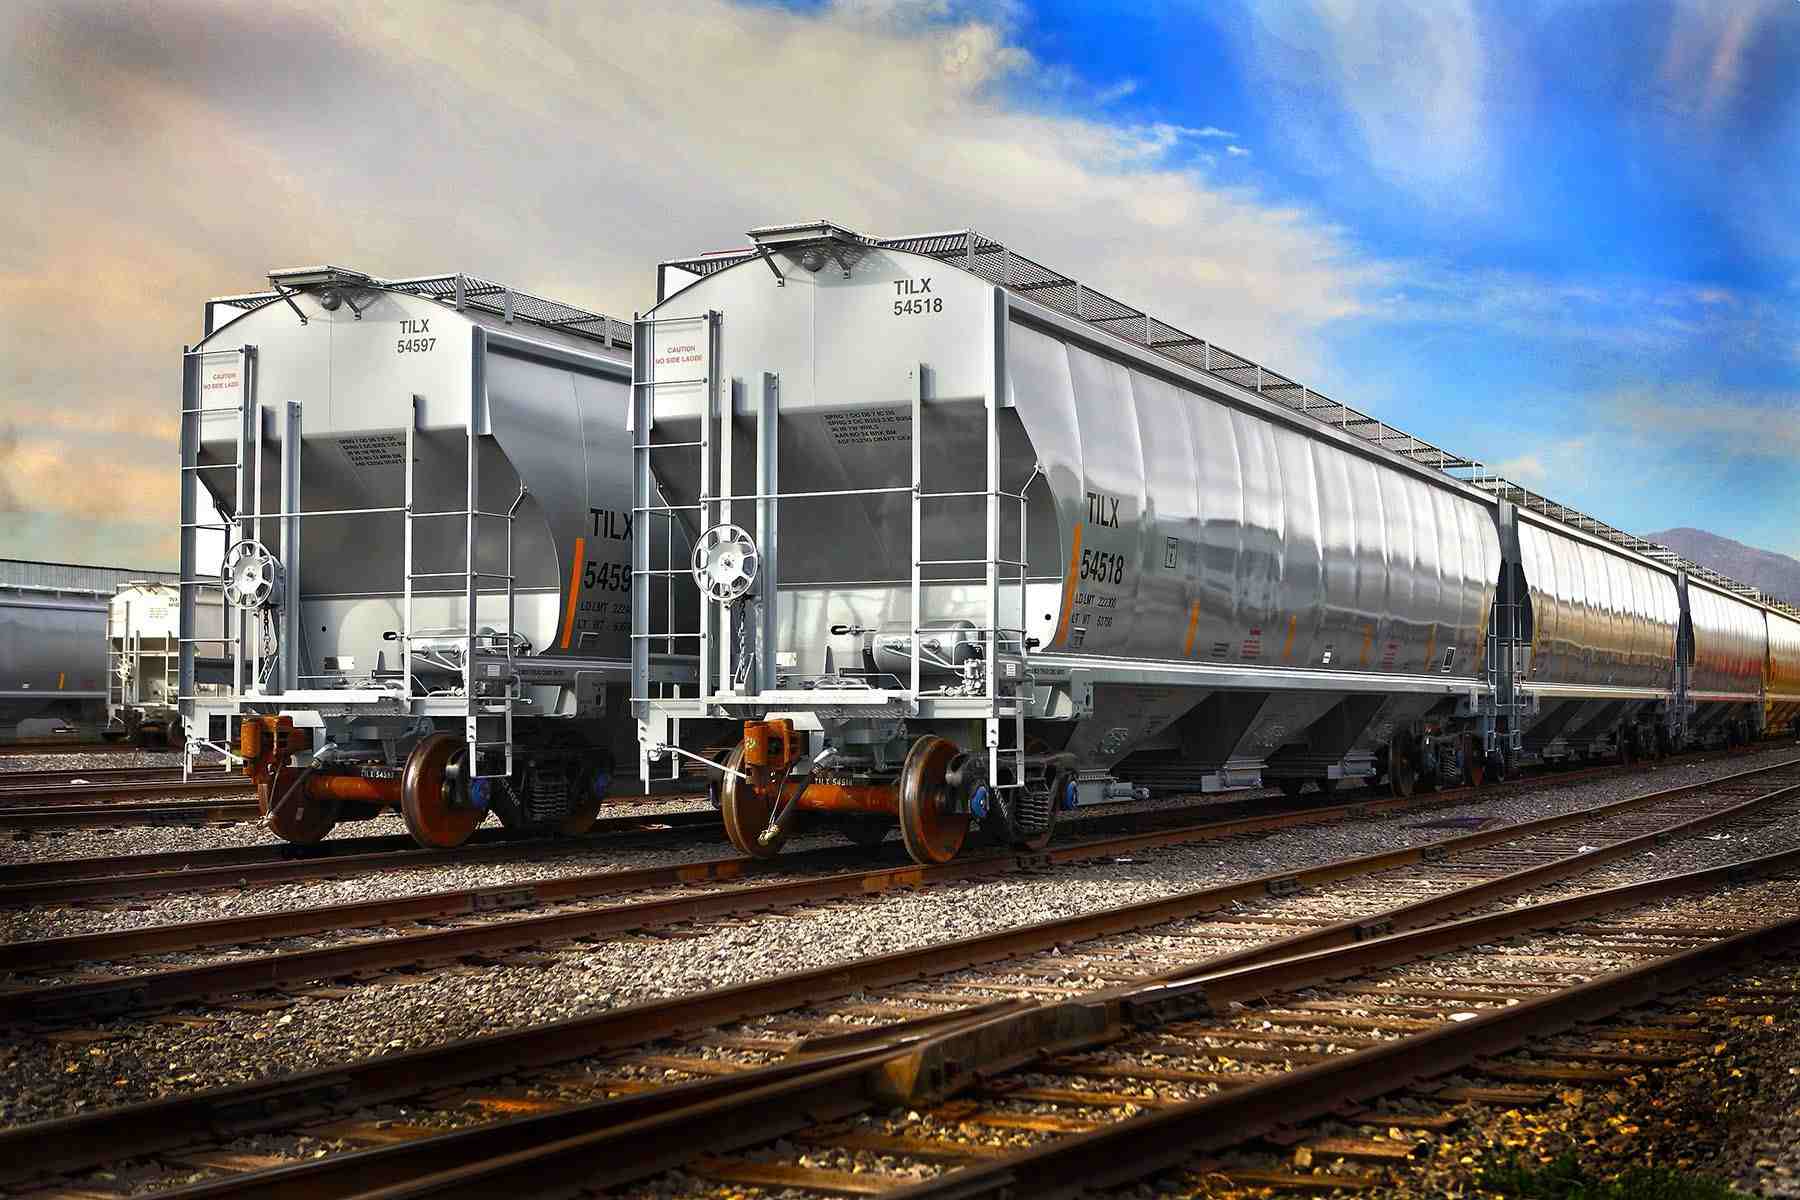 Efficiency in Motion: Line of Newly Manufactured Hooper Railcars on the Tracks